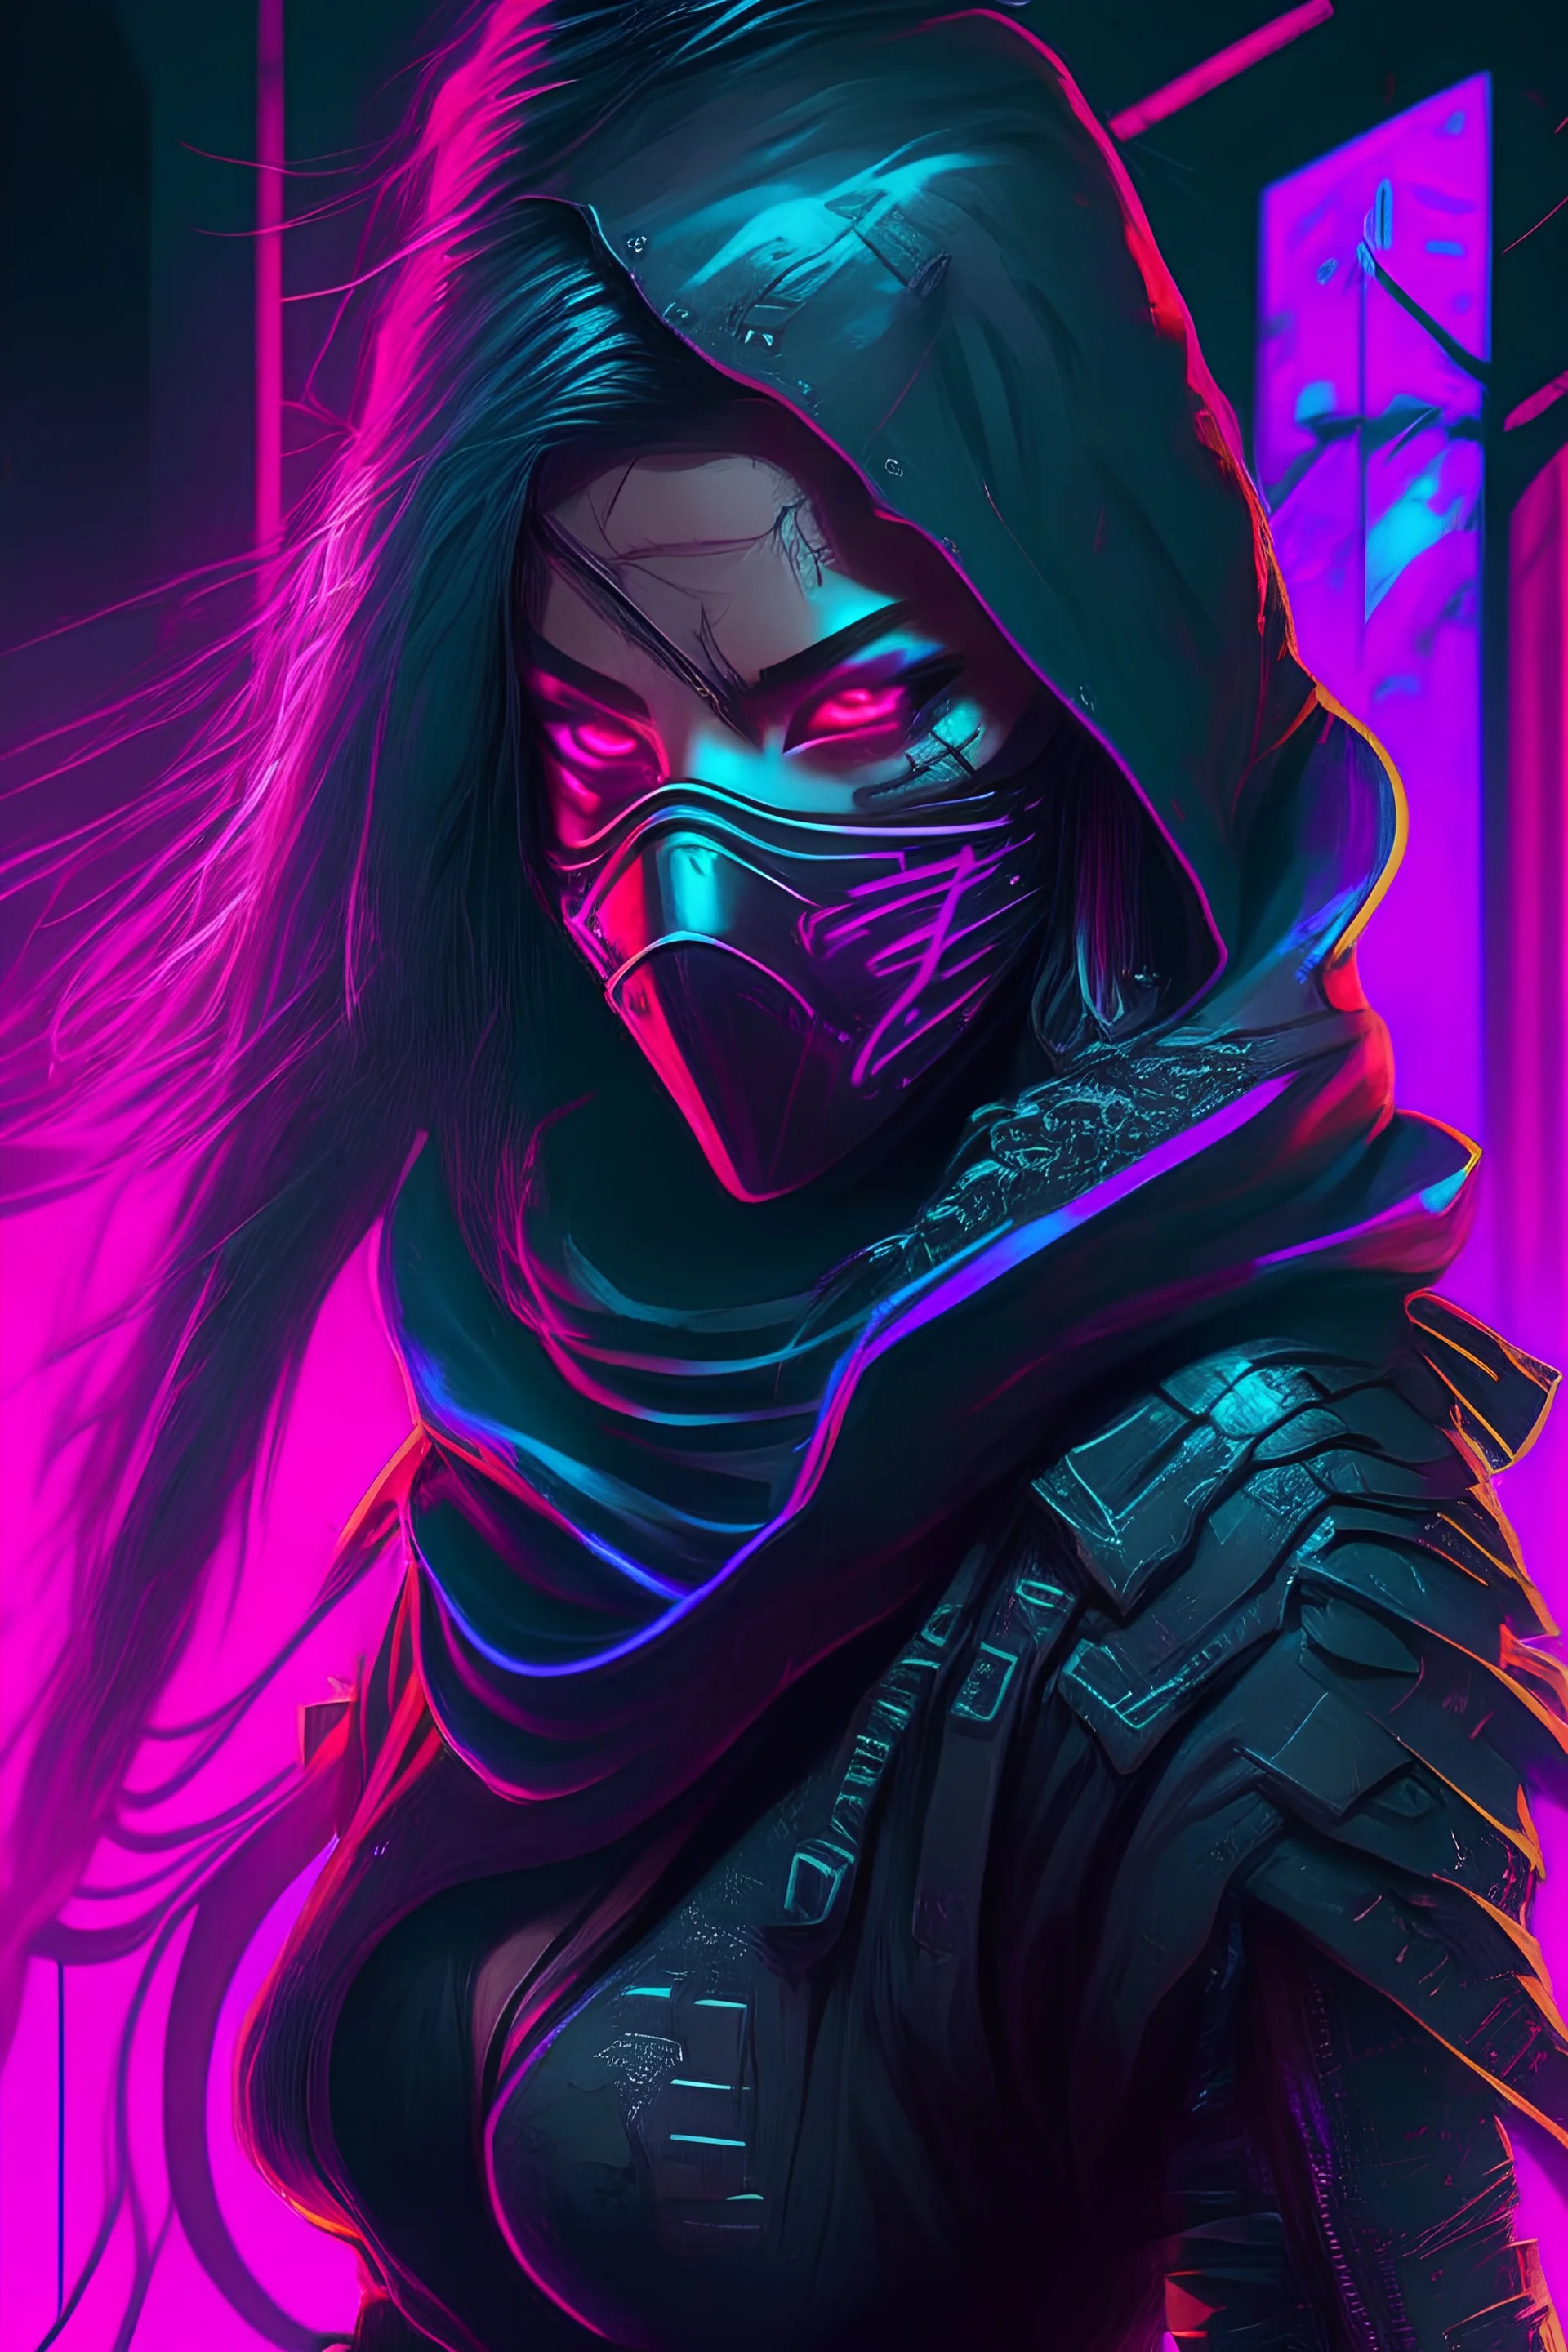 shadow ninja woman with cyberpunk and neon accents